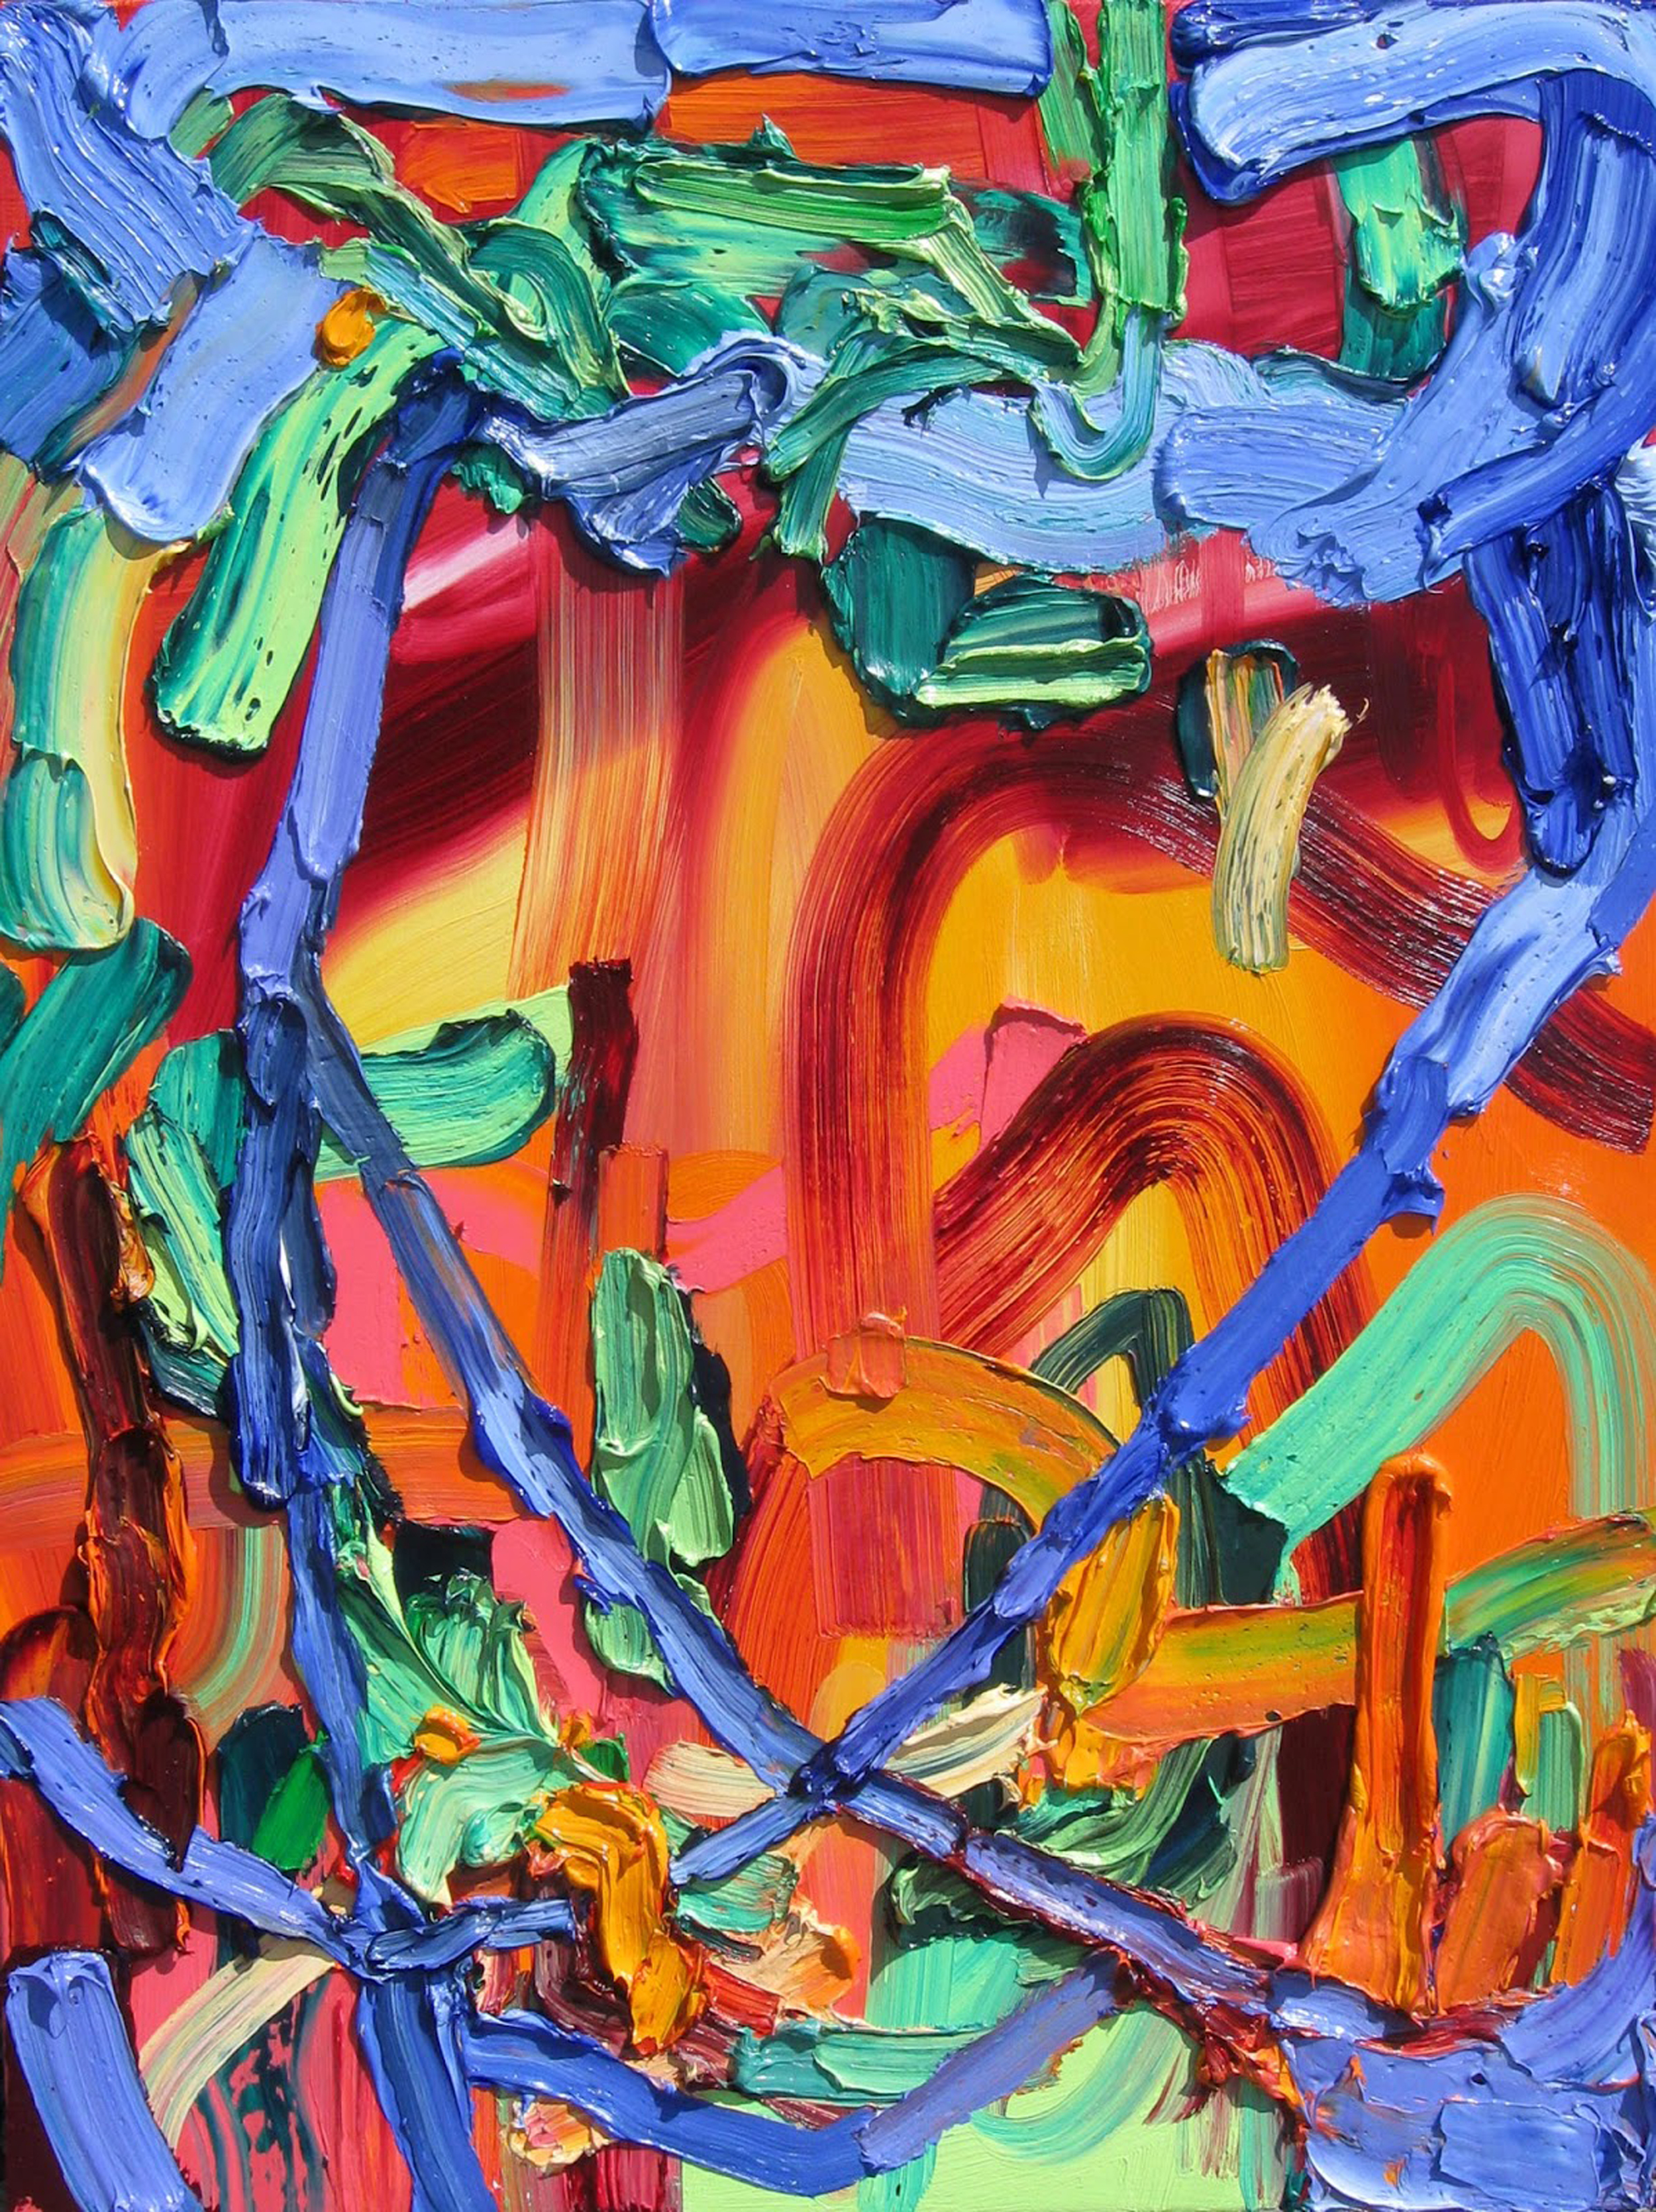 Into the Tangle #2 / oil on canvas / 40 x 30 inches (sold)